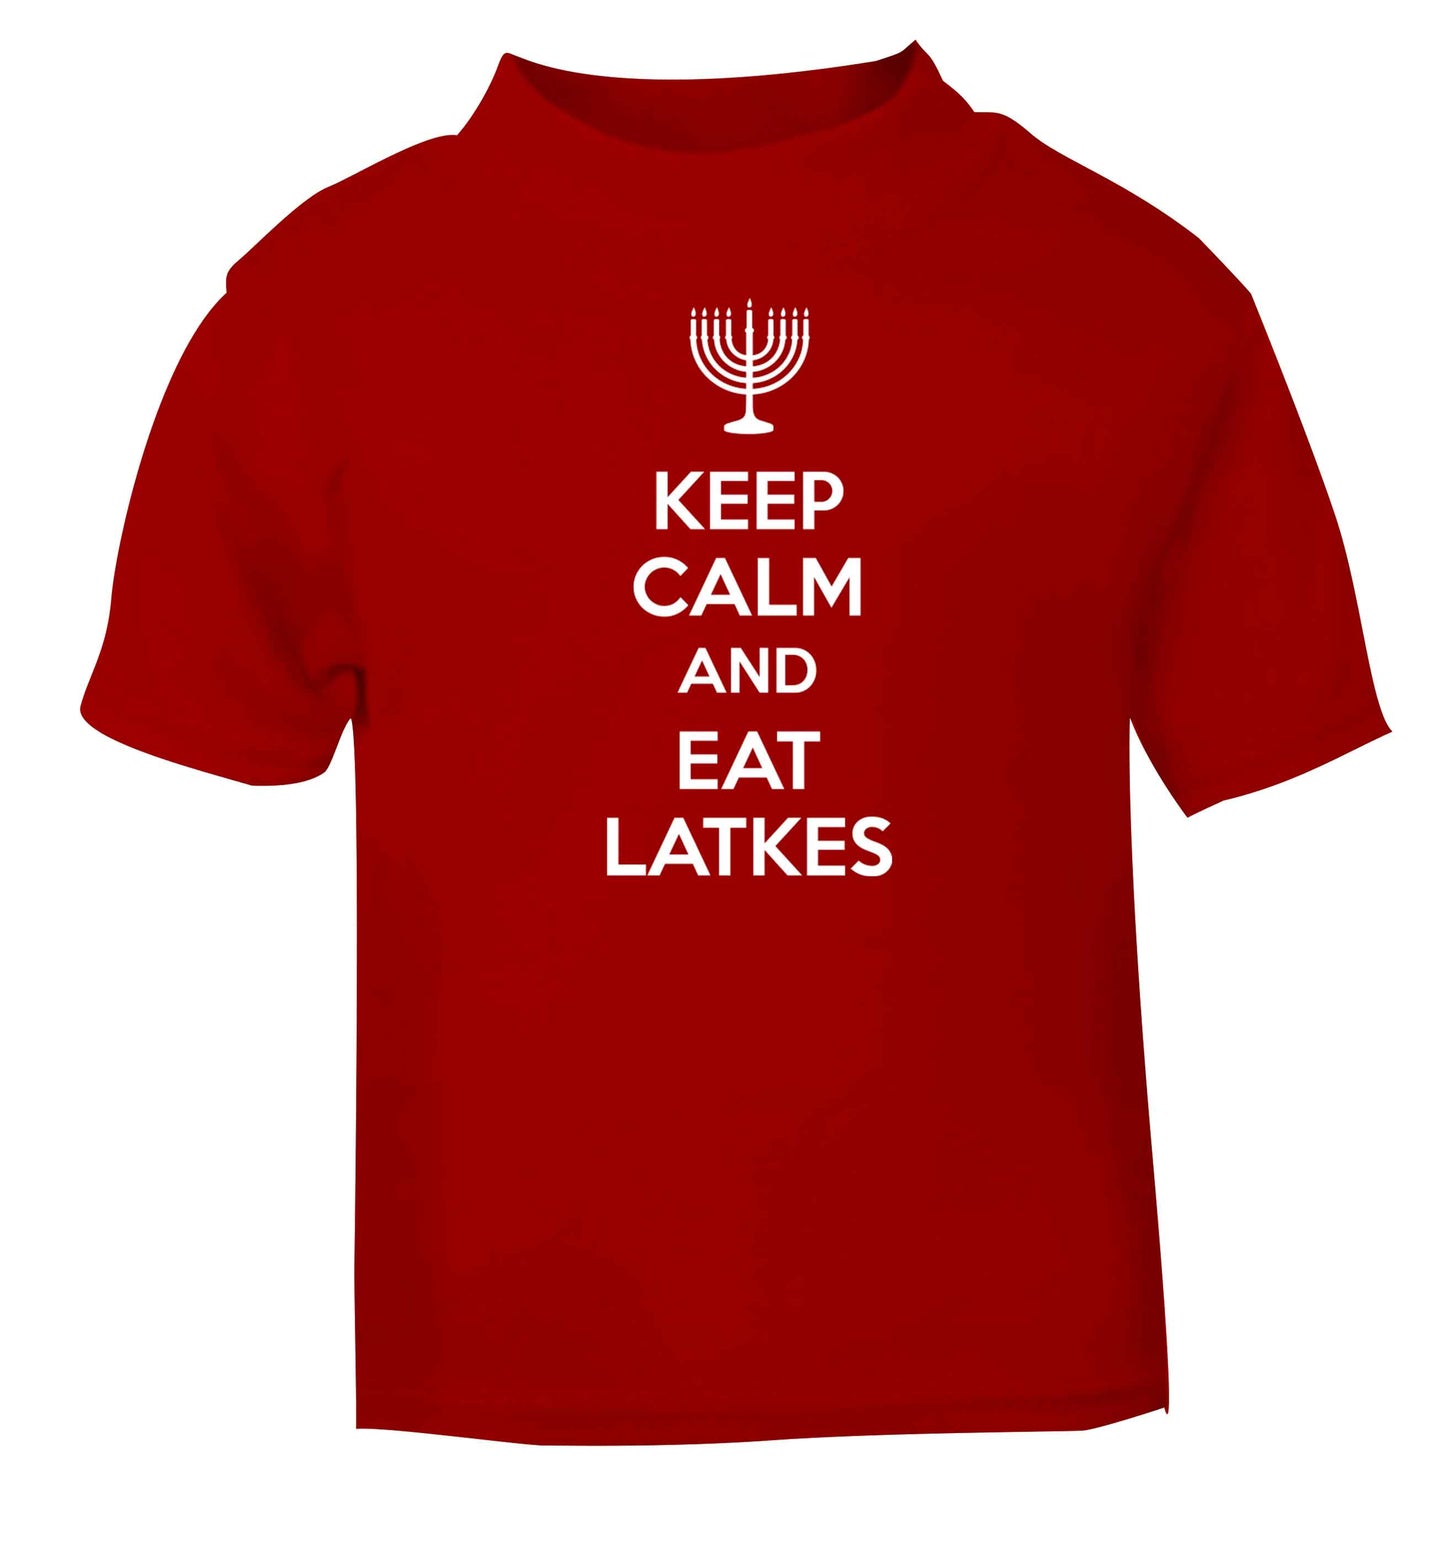 Keep calm and eat latkes red baby toddler Tshirt 2 Years